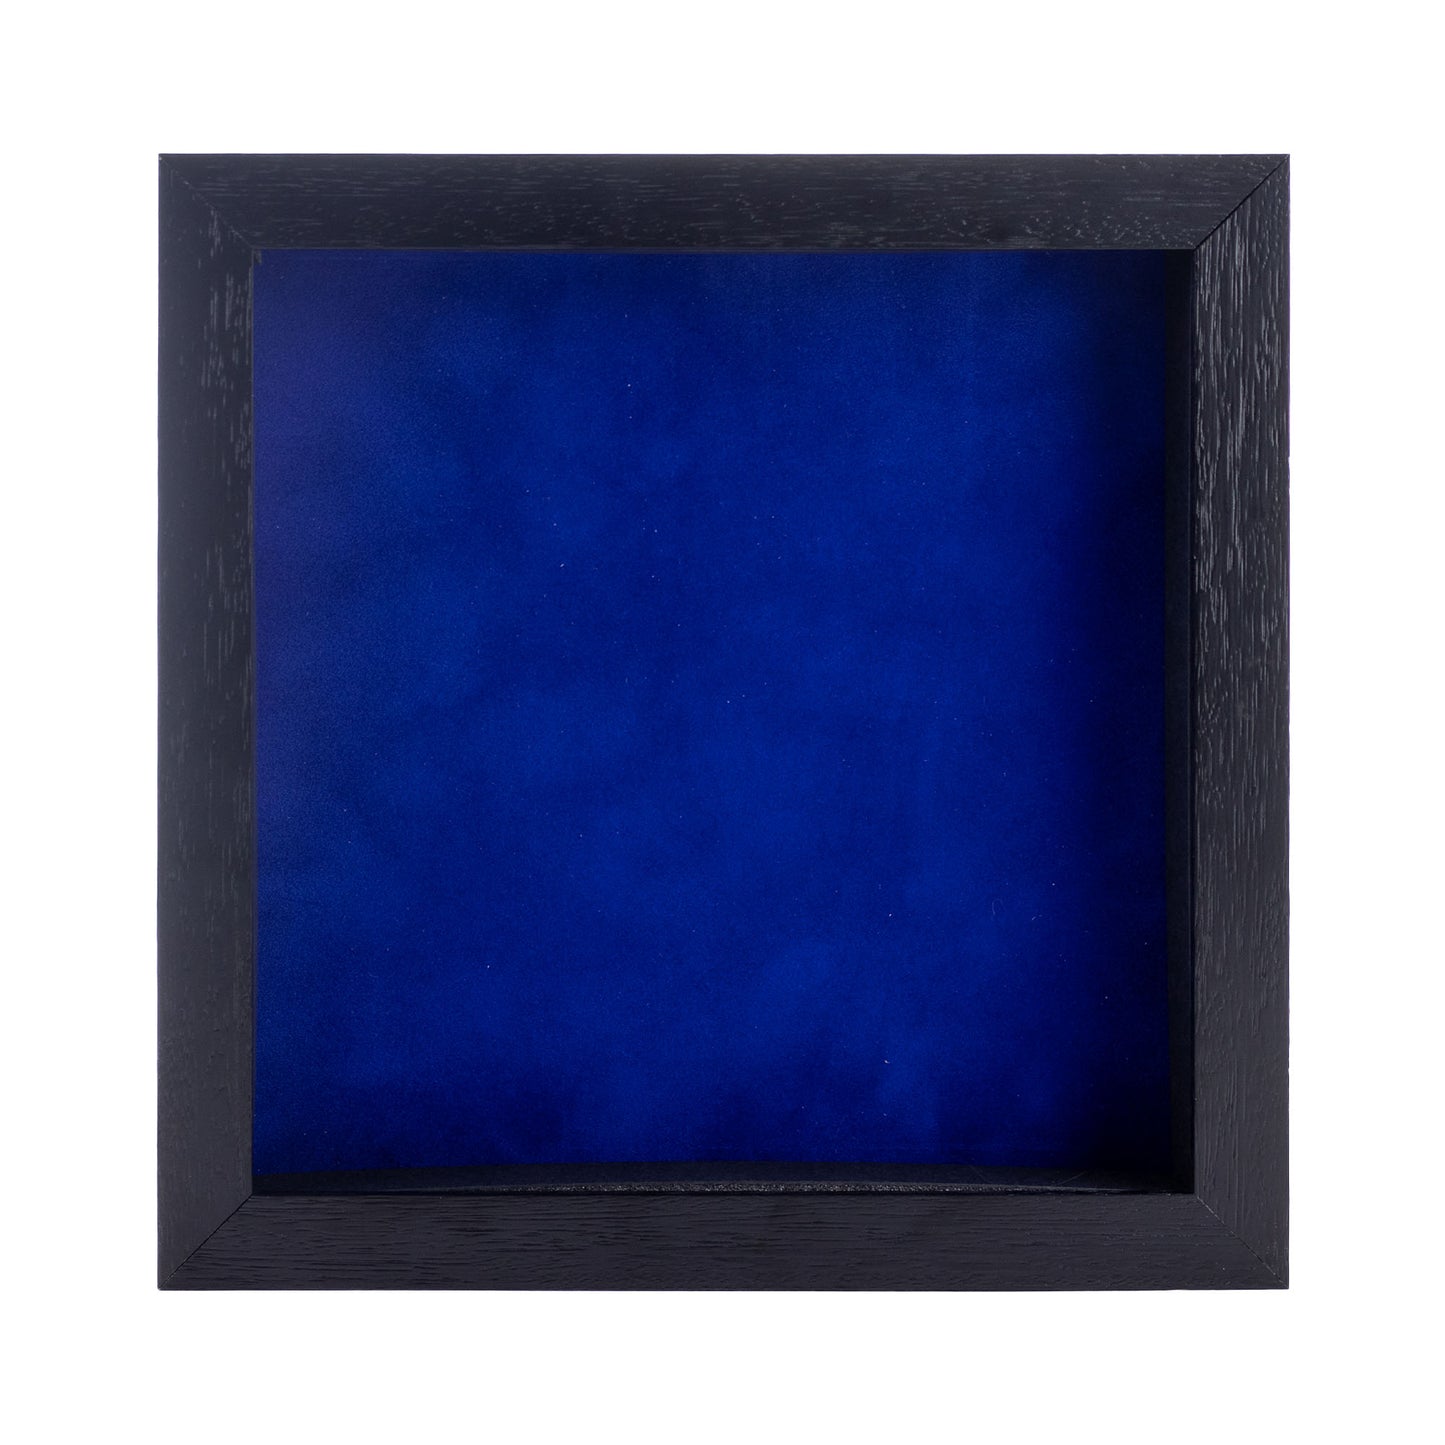 Textured Black Shadow Box Frame With Royal Blue Acid-Free Suede Backing